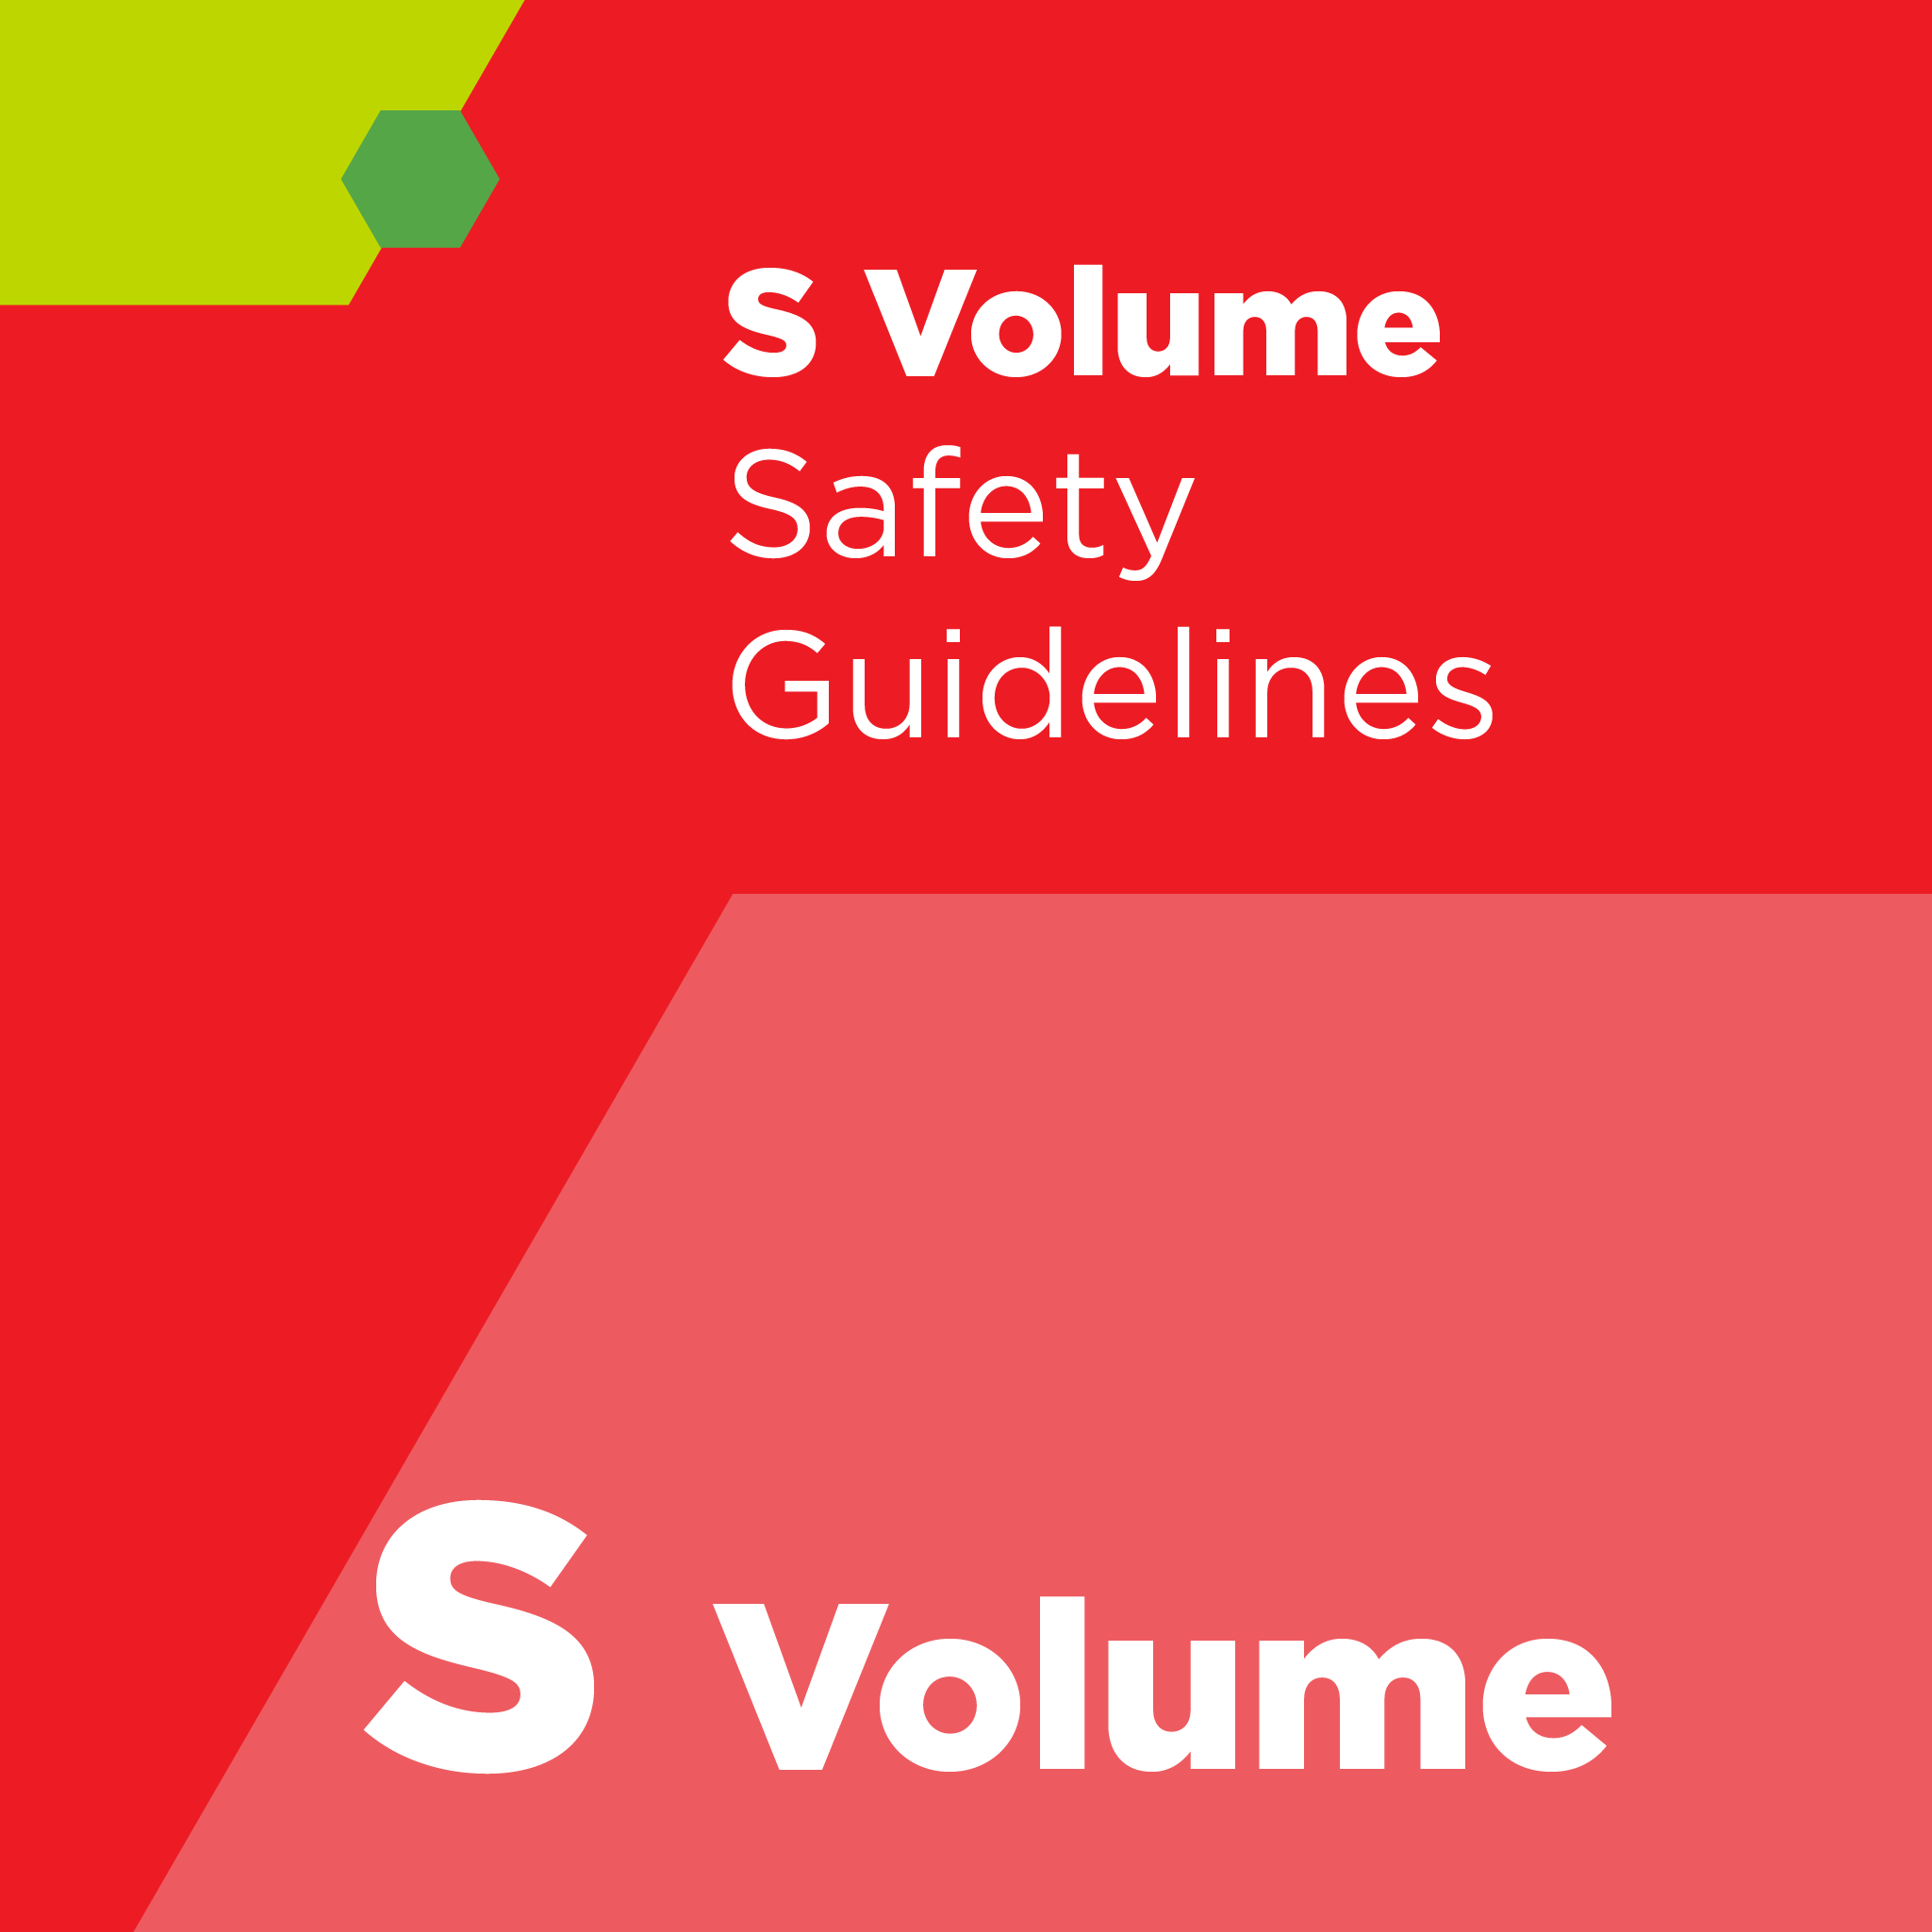 S02800 - SEMI S28 - Safety Guideline for Robots and Load Ports Intended for Use in Semiconductor Manufacturing Equipment